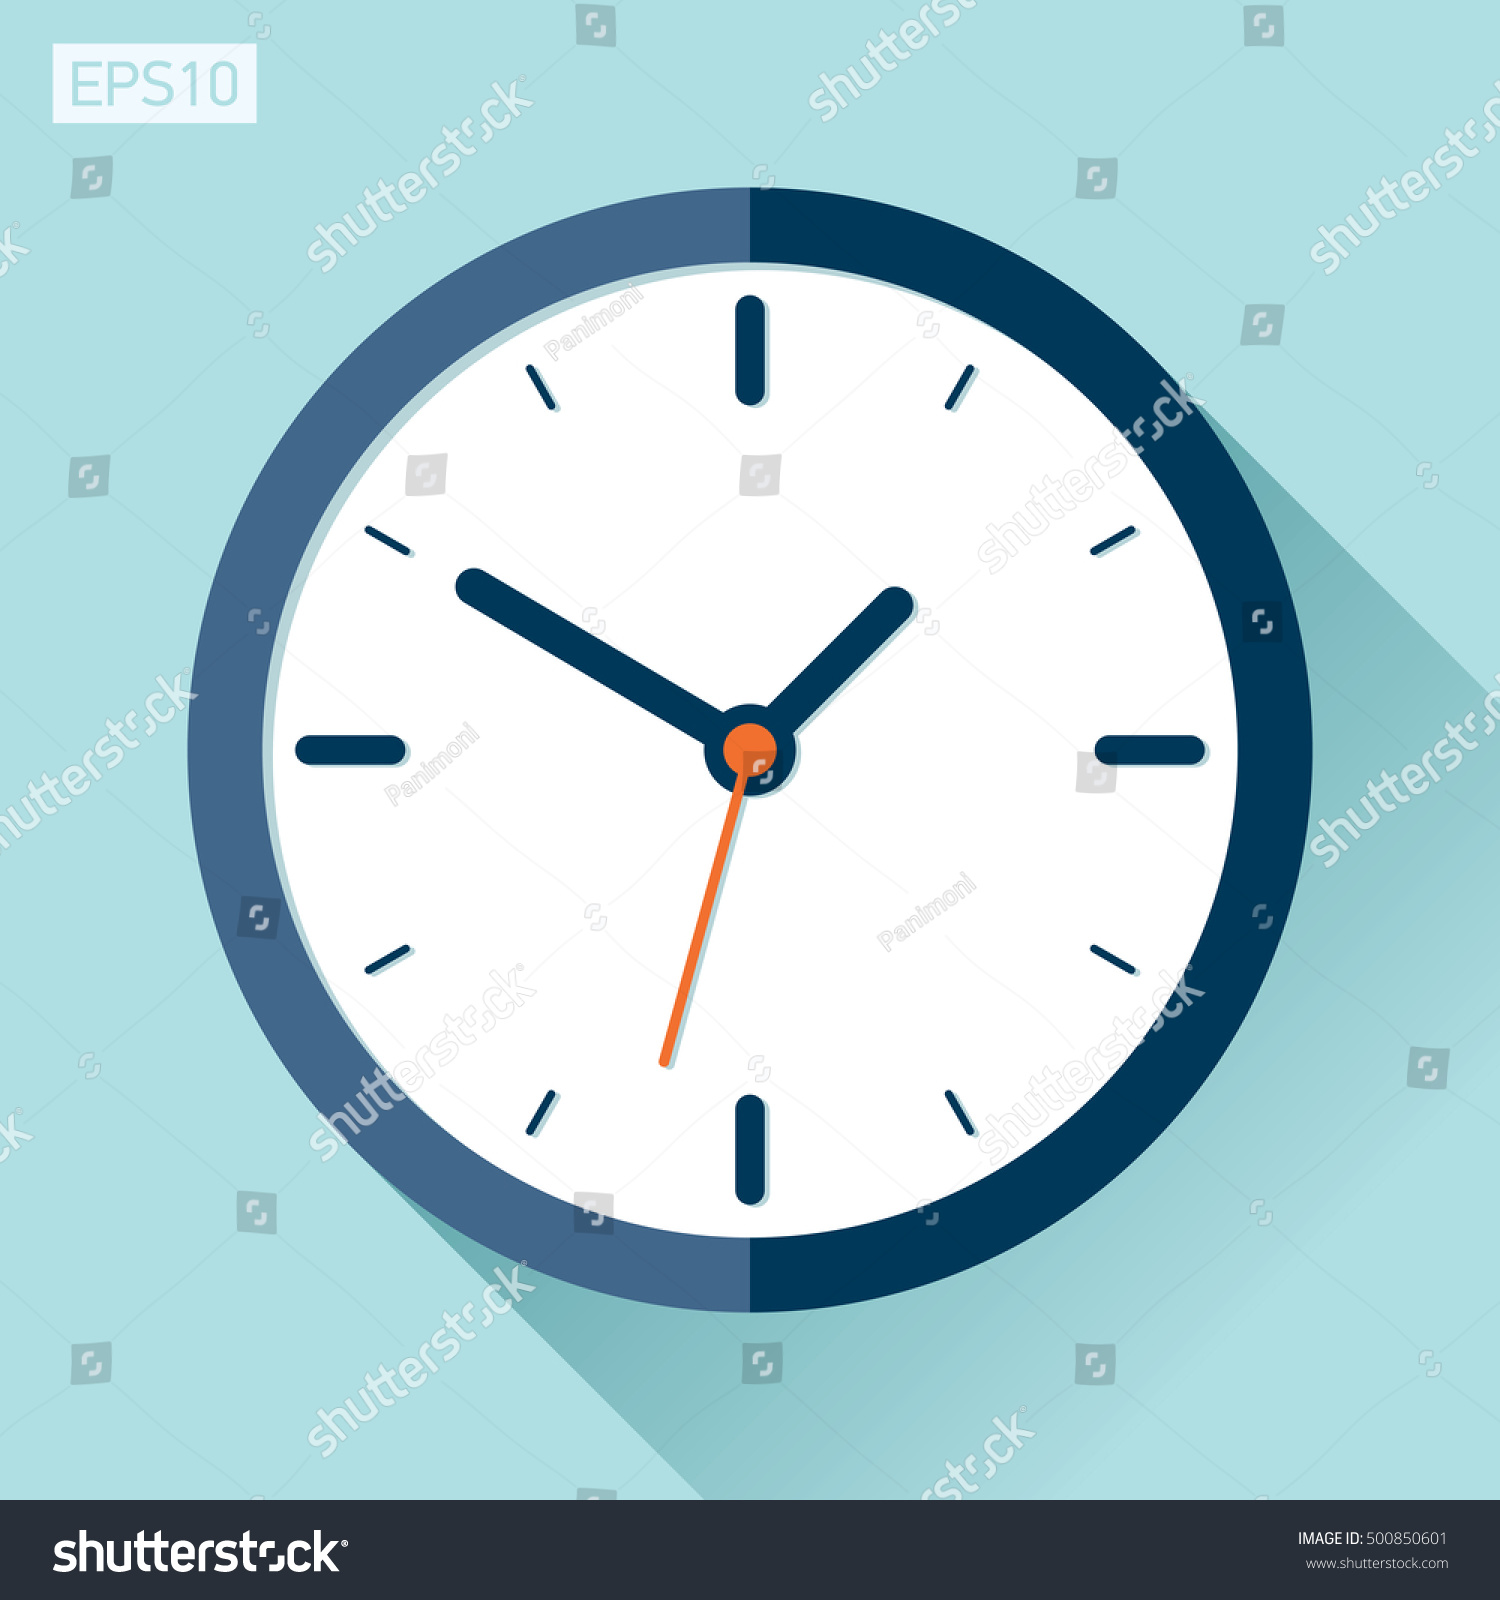 Clock icon in flat style, timer on color background. Vector design element #500850601